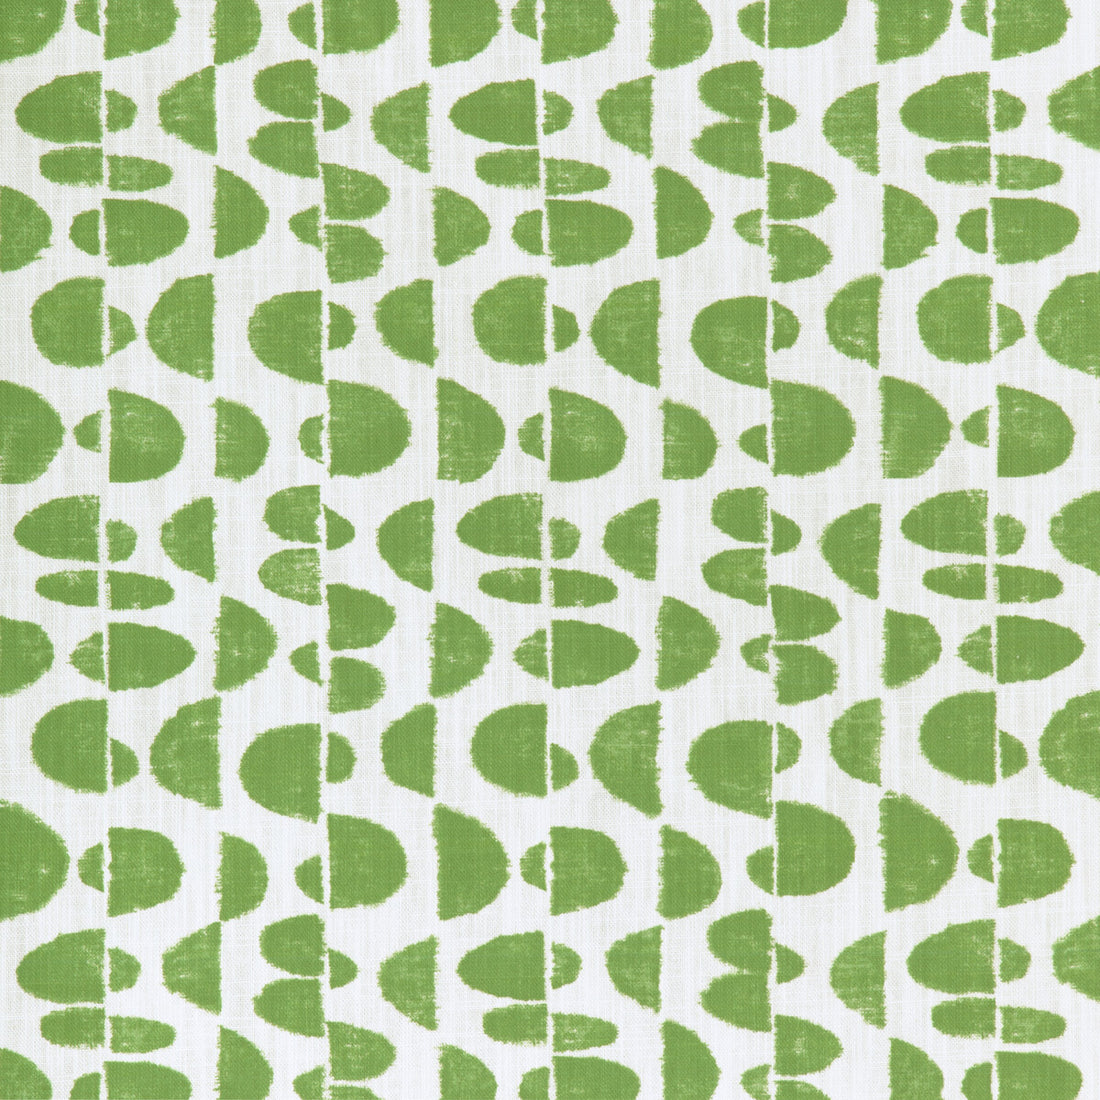 Moon Phase fabric in aloe color - pattern MOON PHASE.31.0 - by Kravet Basics in the Small Scale Prints collection